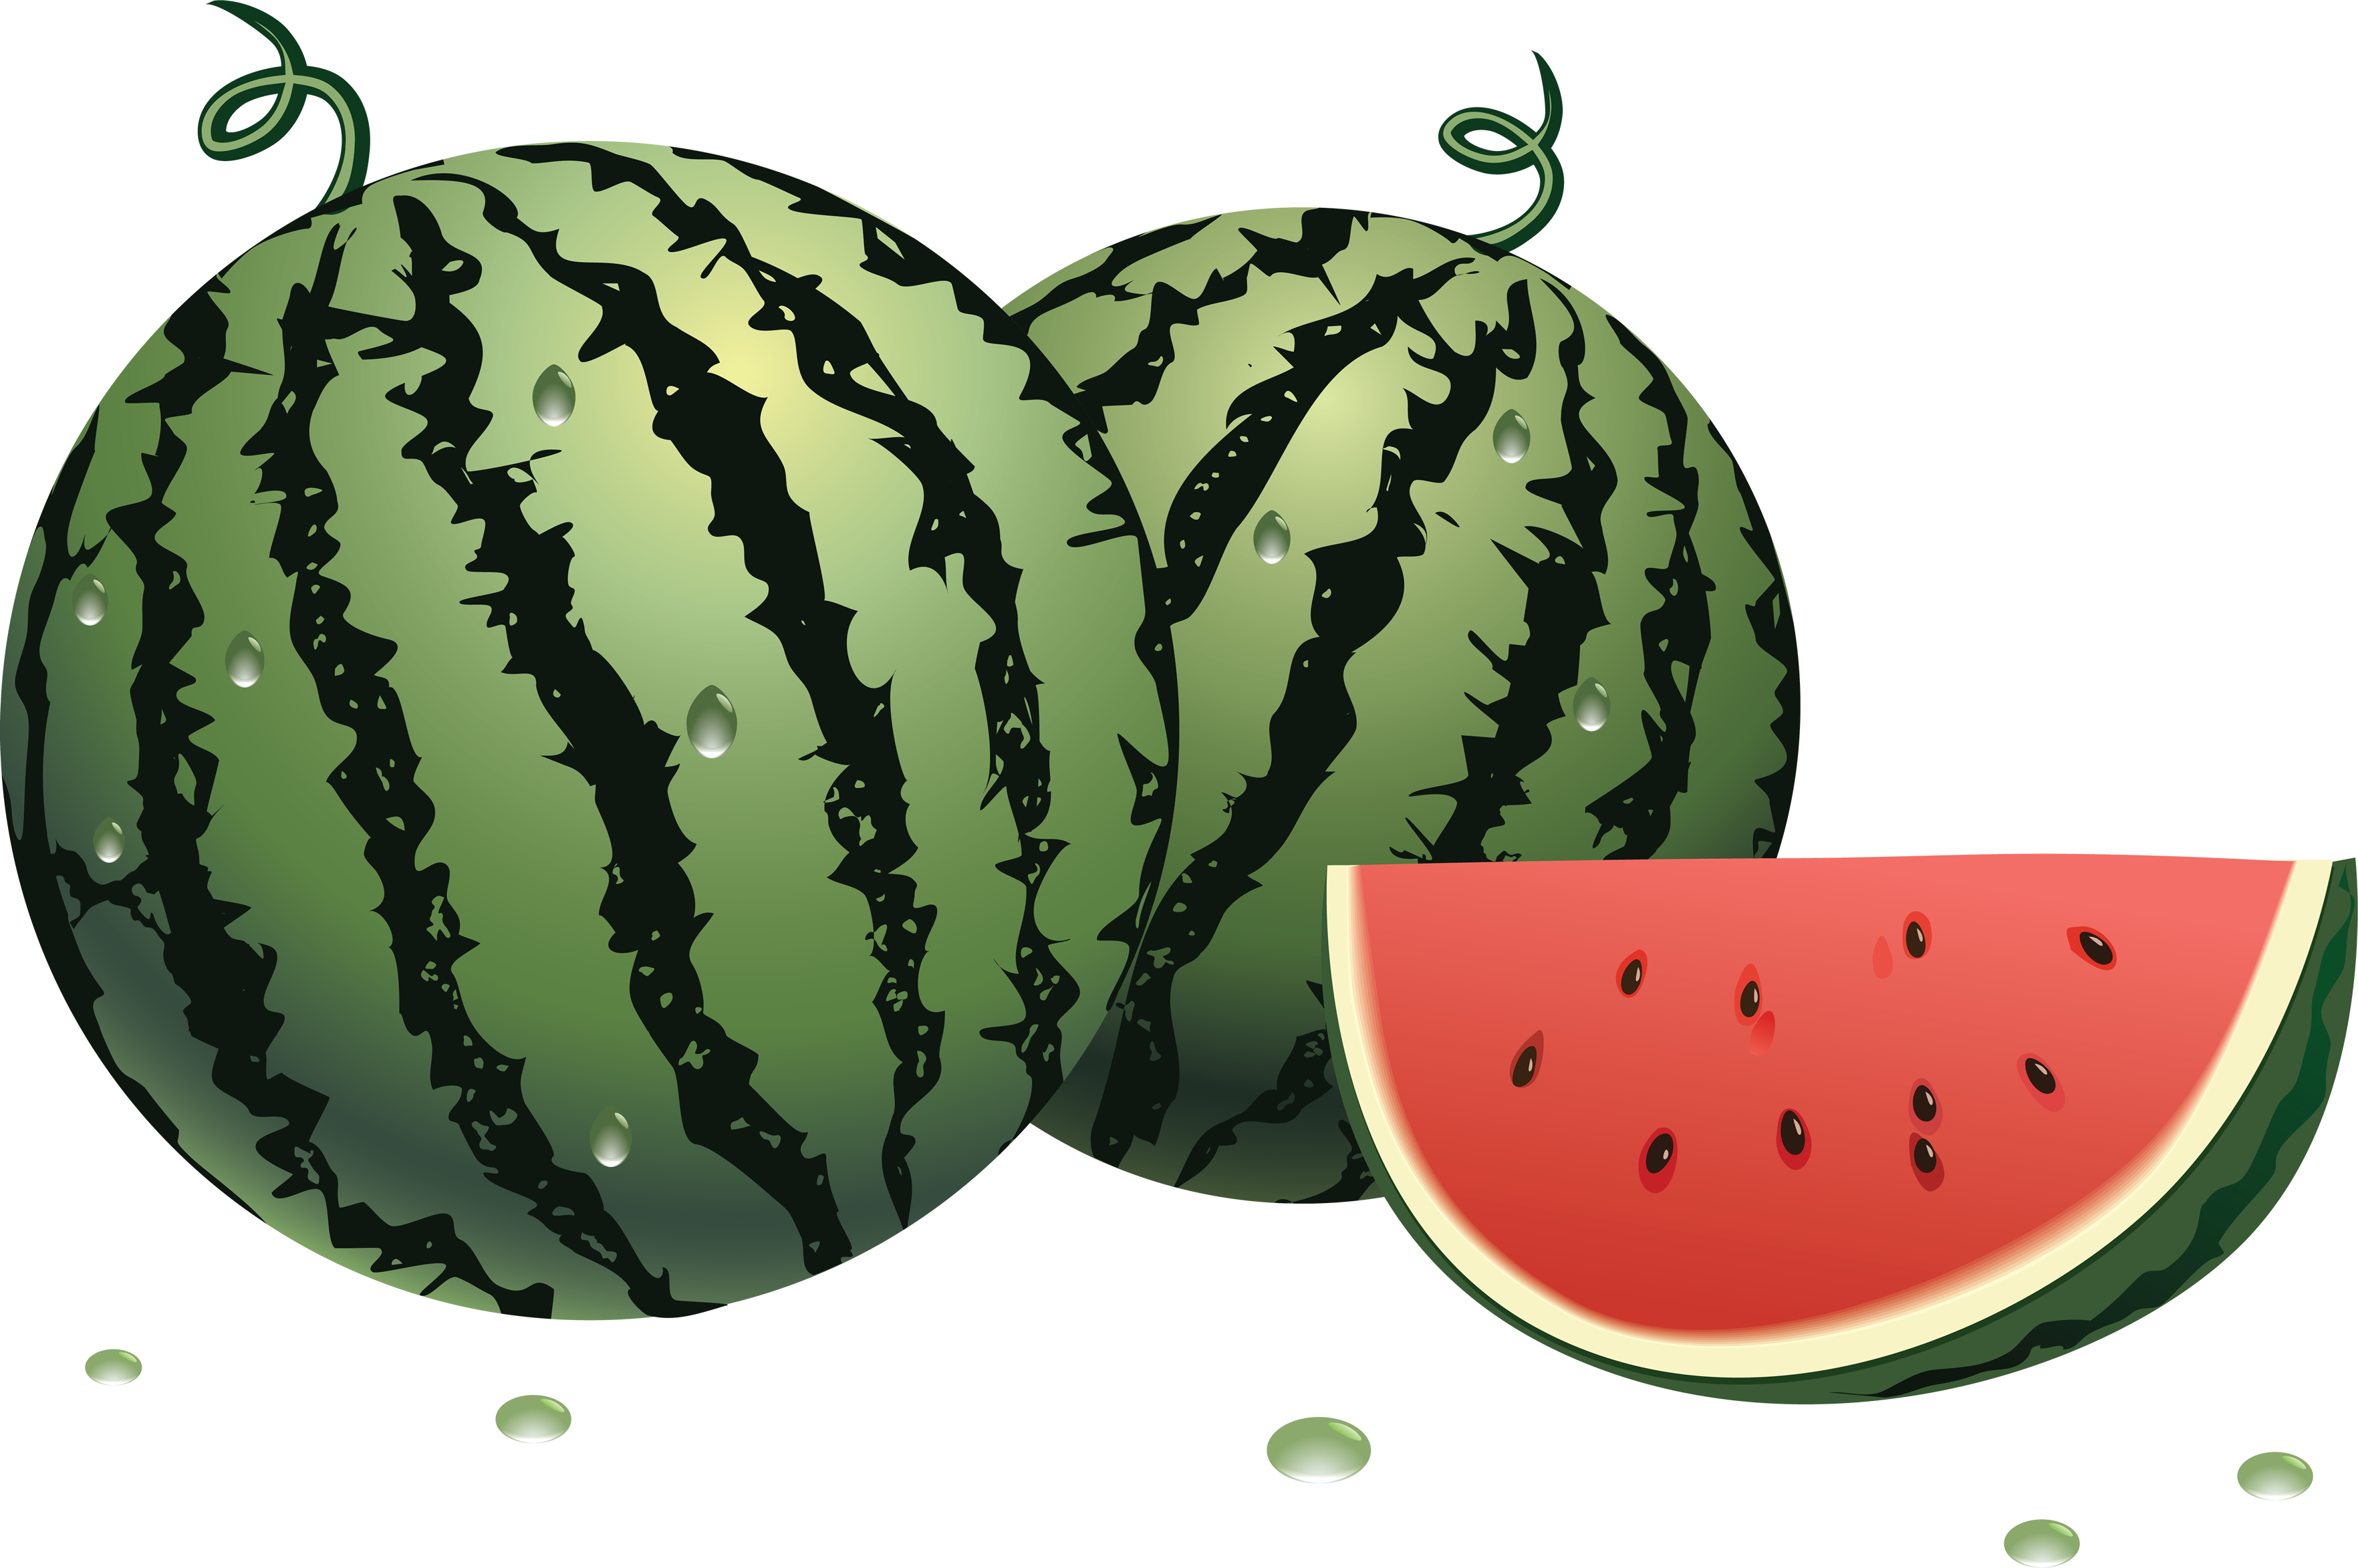 Watermelon Png Image Clipart